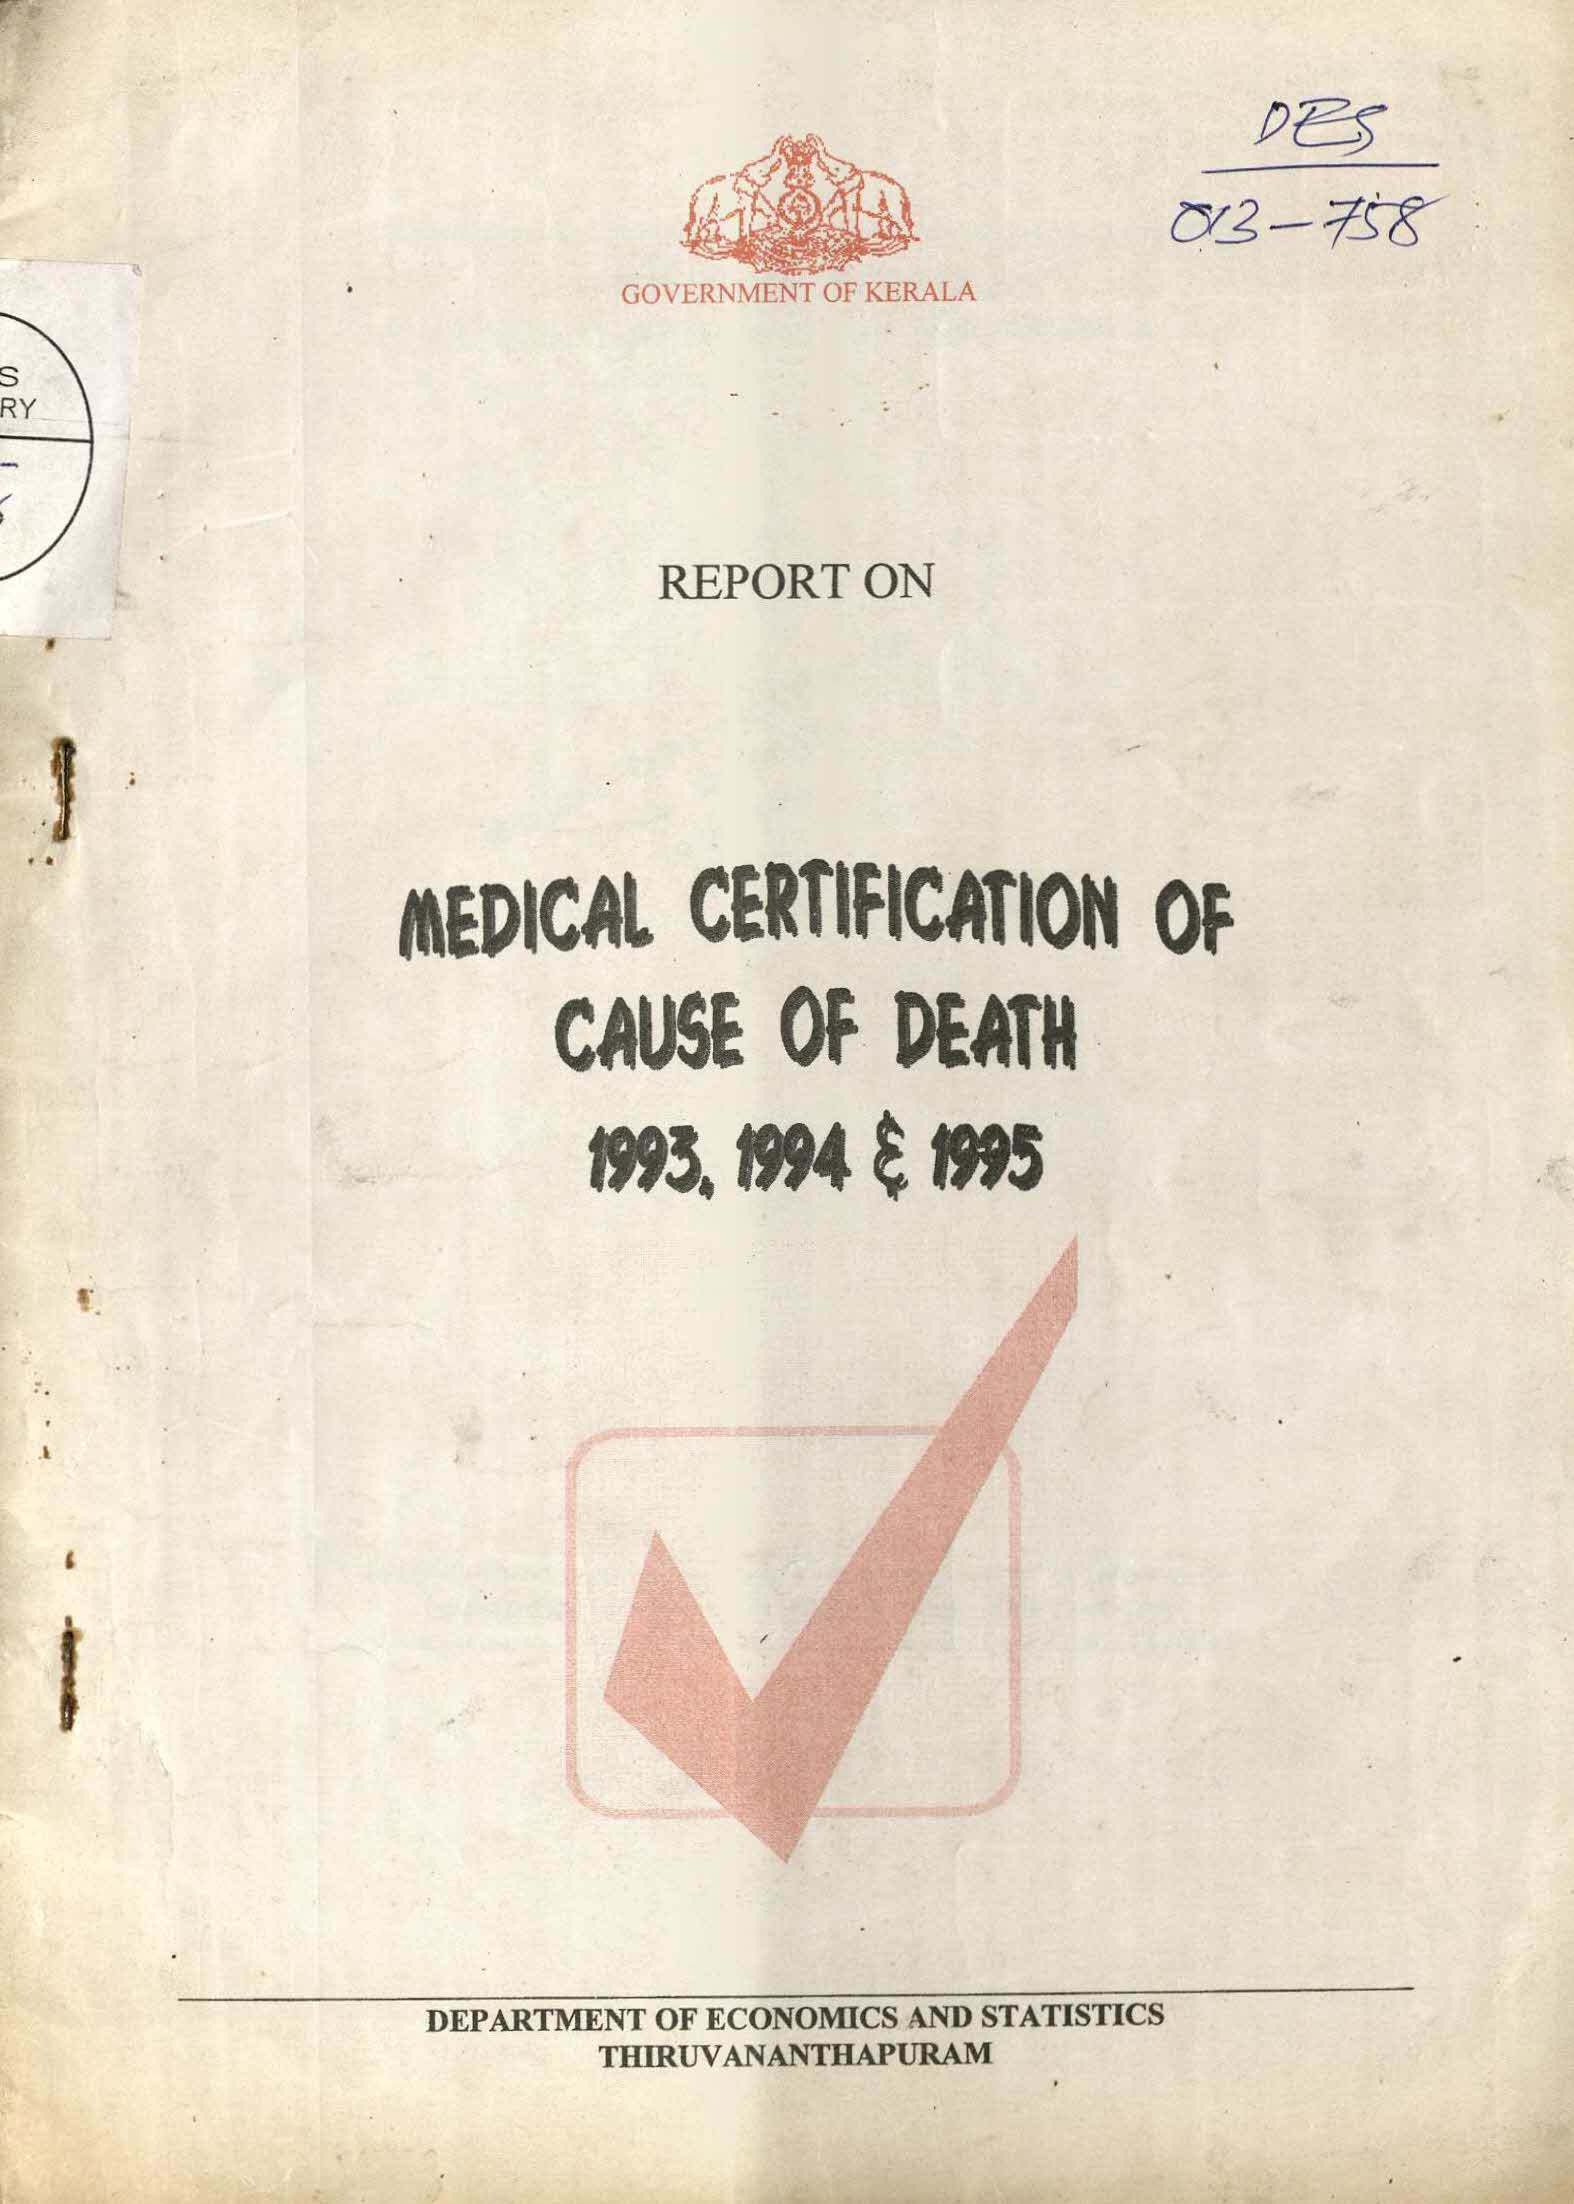 Report On Medical Certification Of Cause Of Death 1993,1994 & 1995